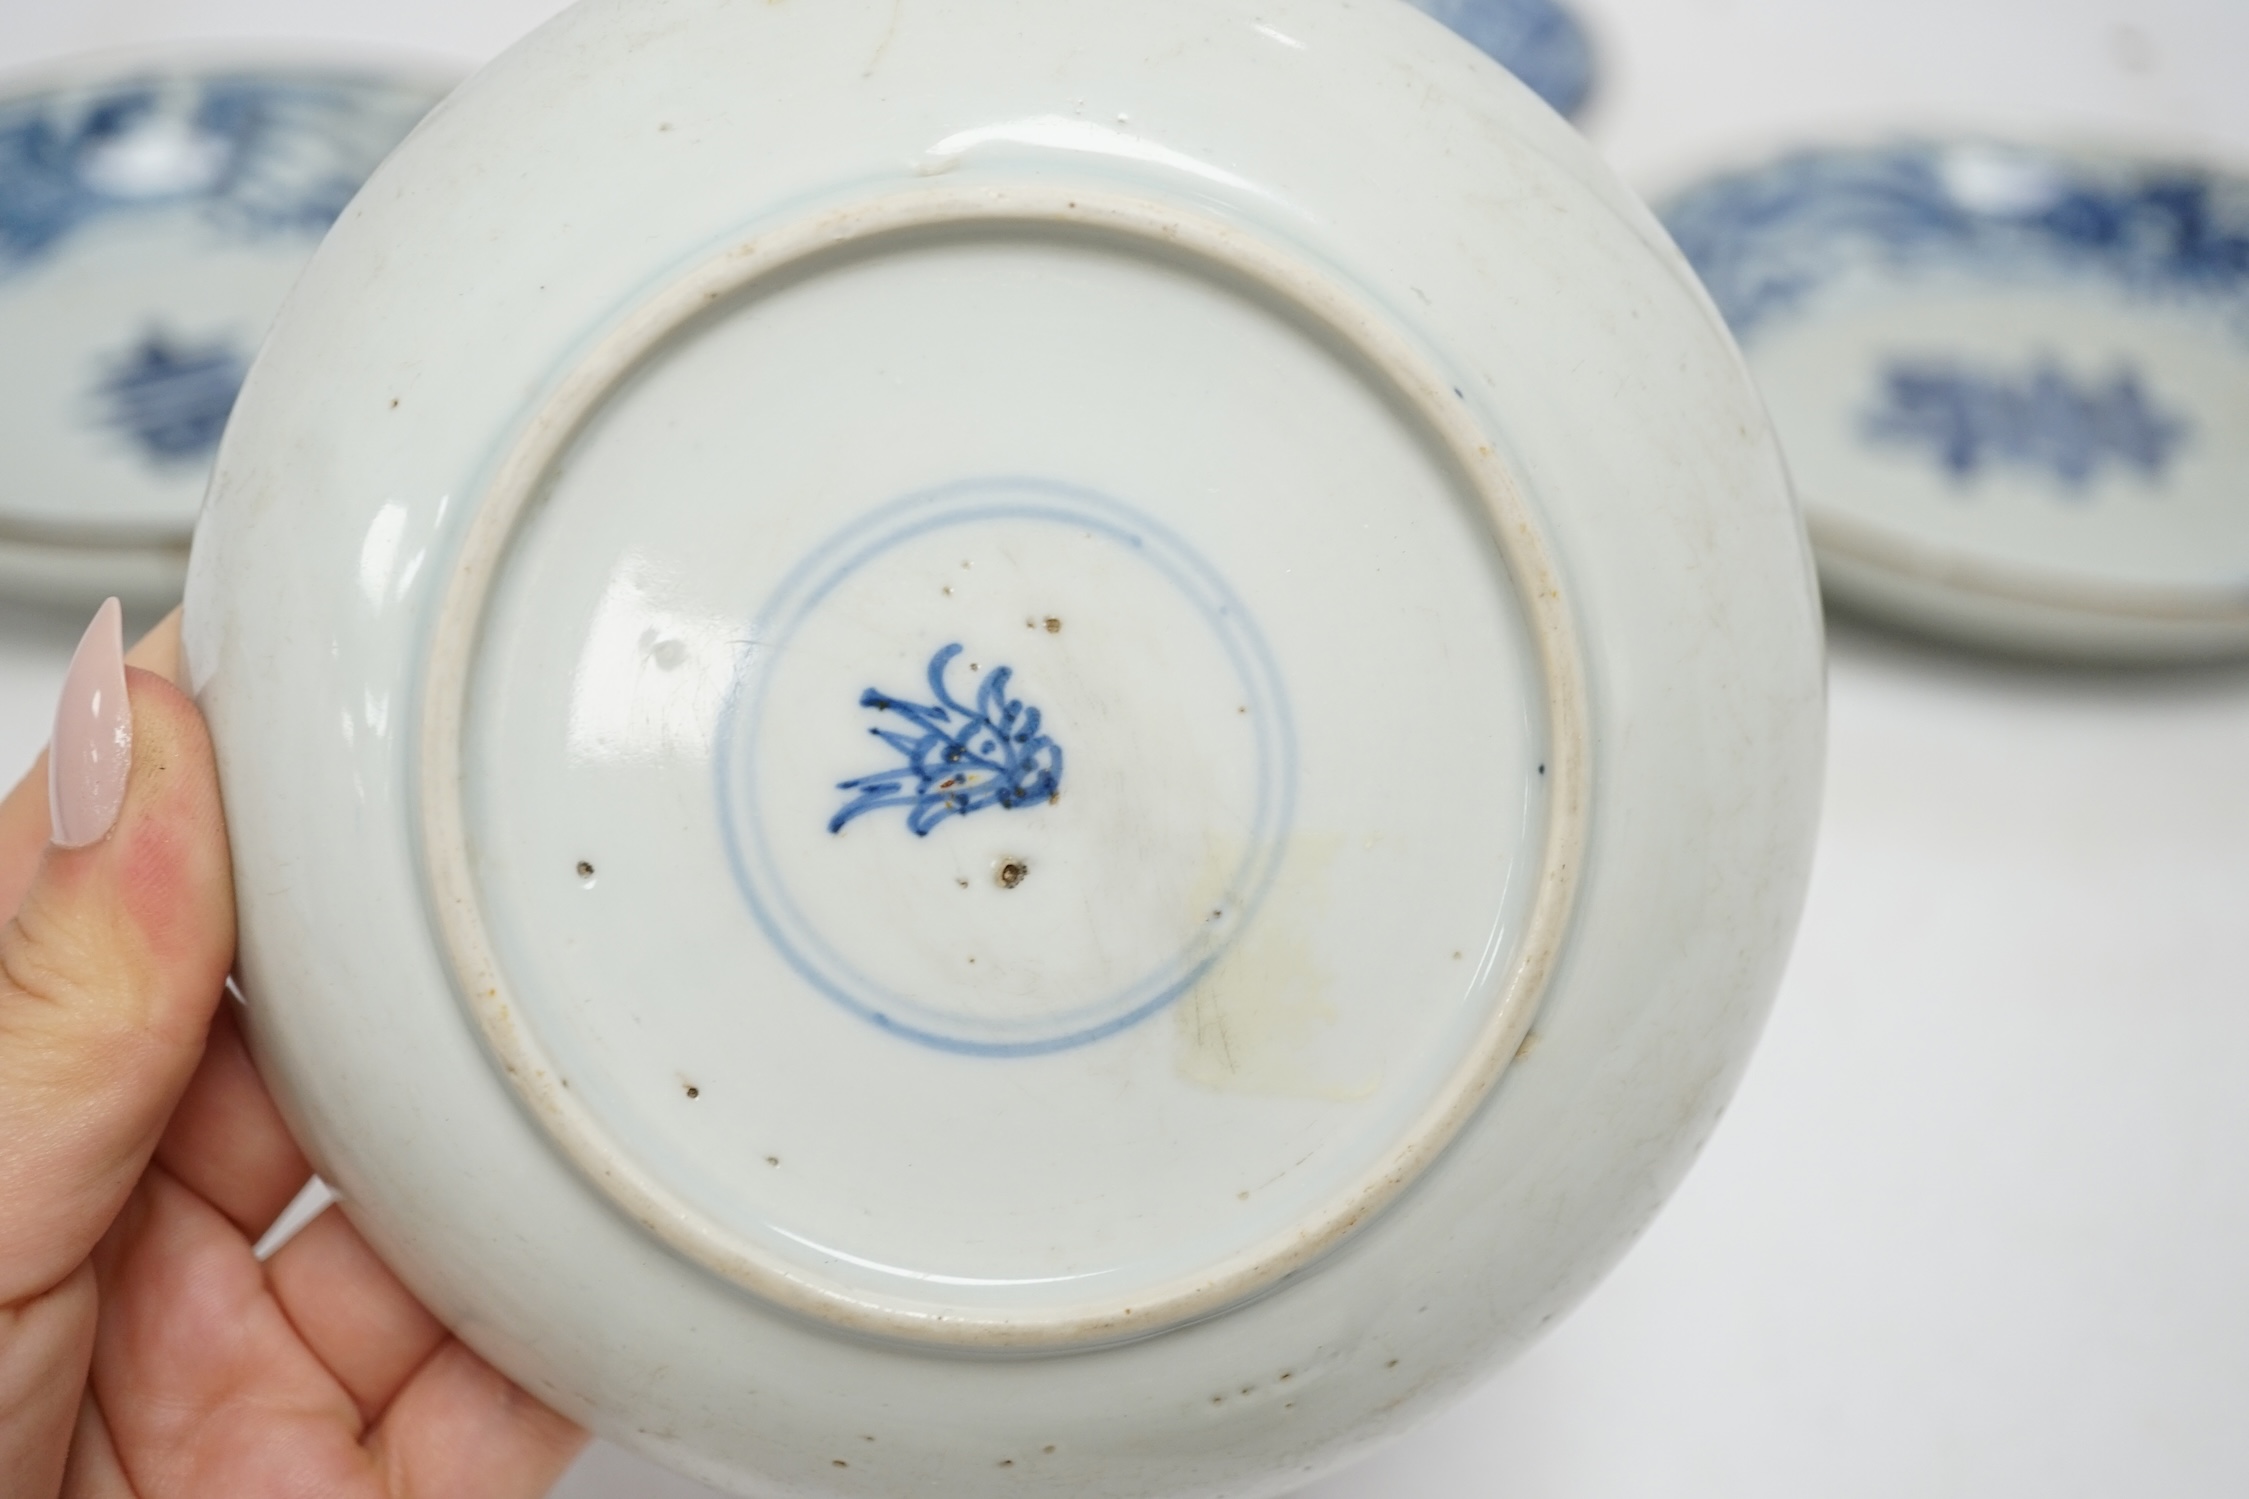 Five variously patterned Chinese blue and white saucer dishes, Kangxi period, largest 16cm diameter. Condition - chips and cracks to three items